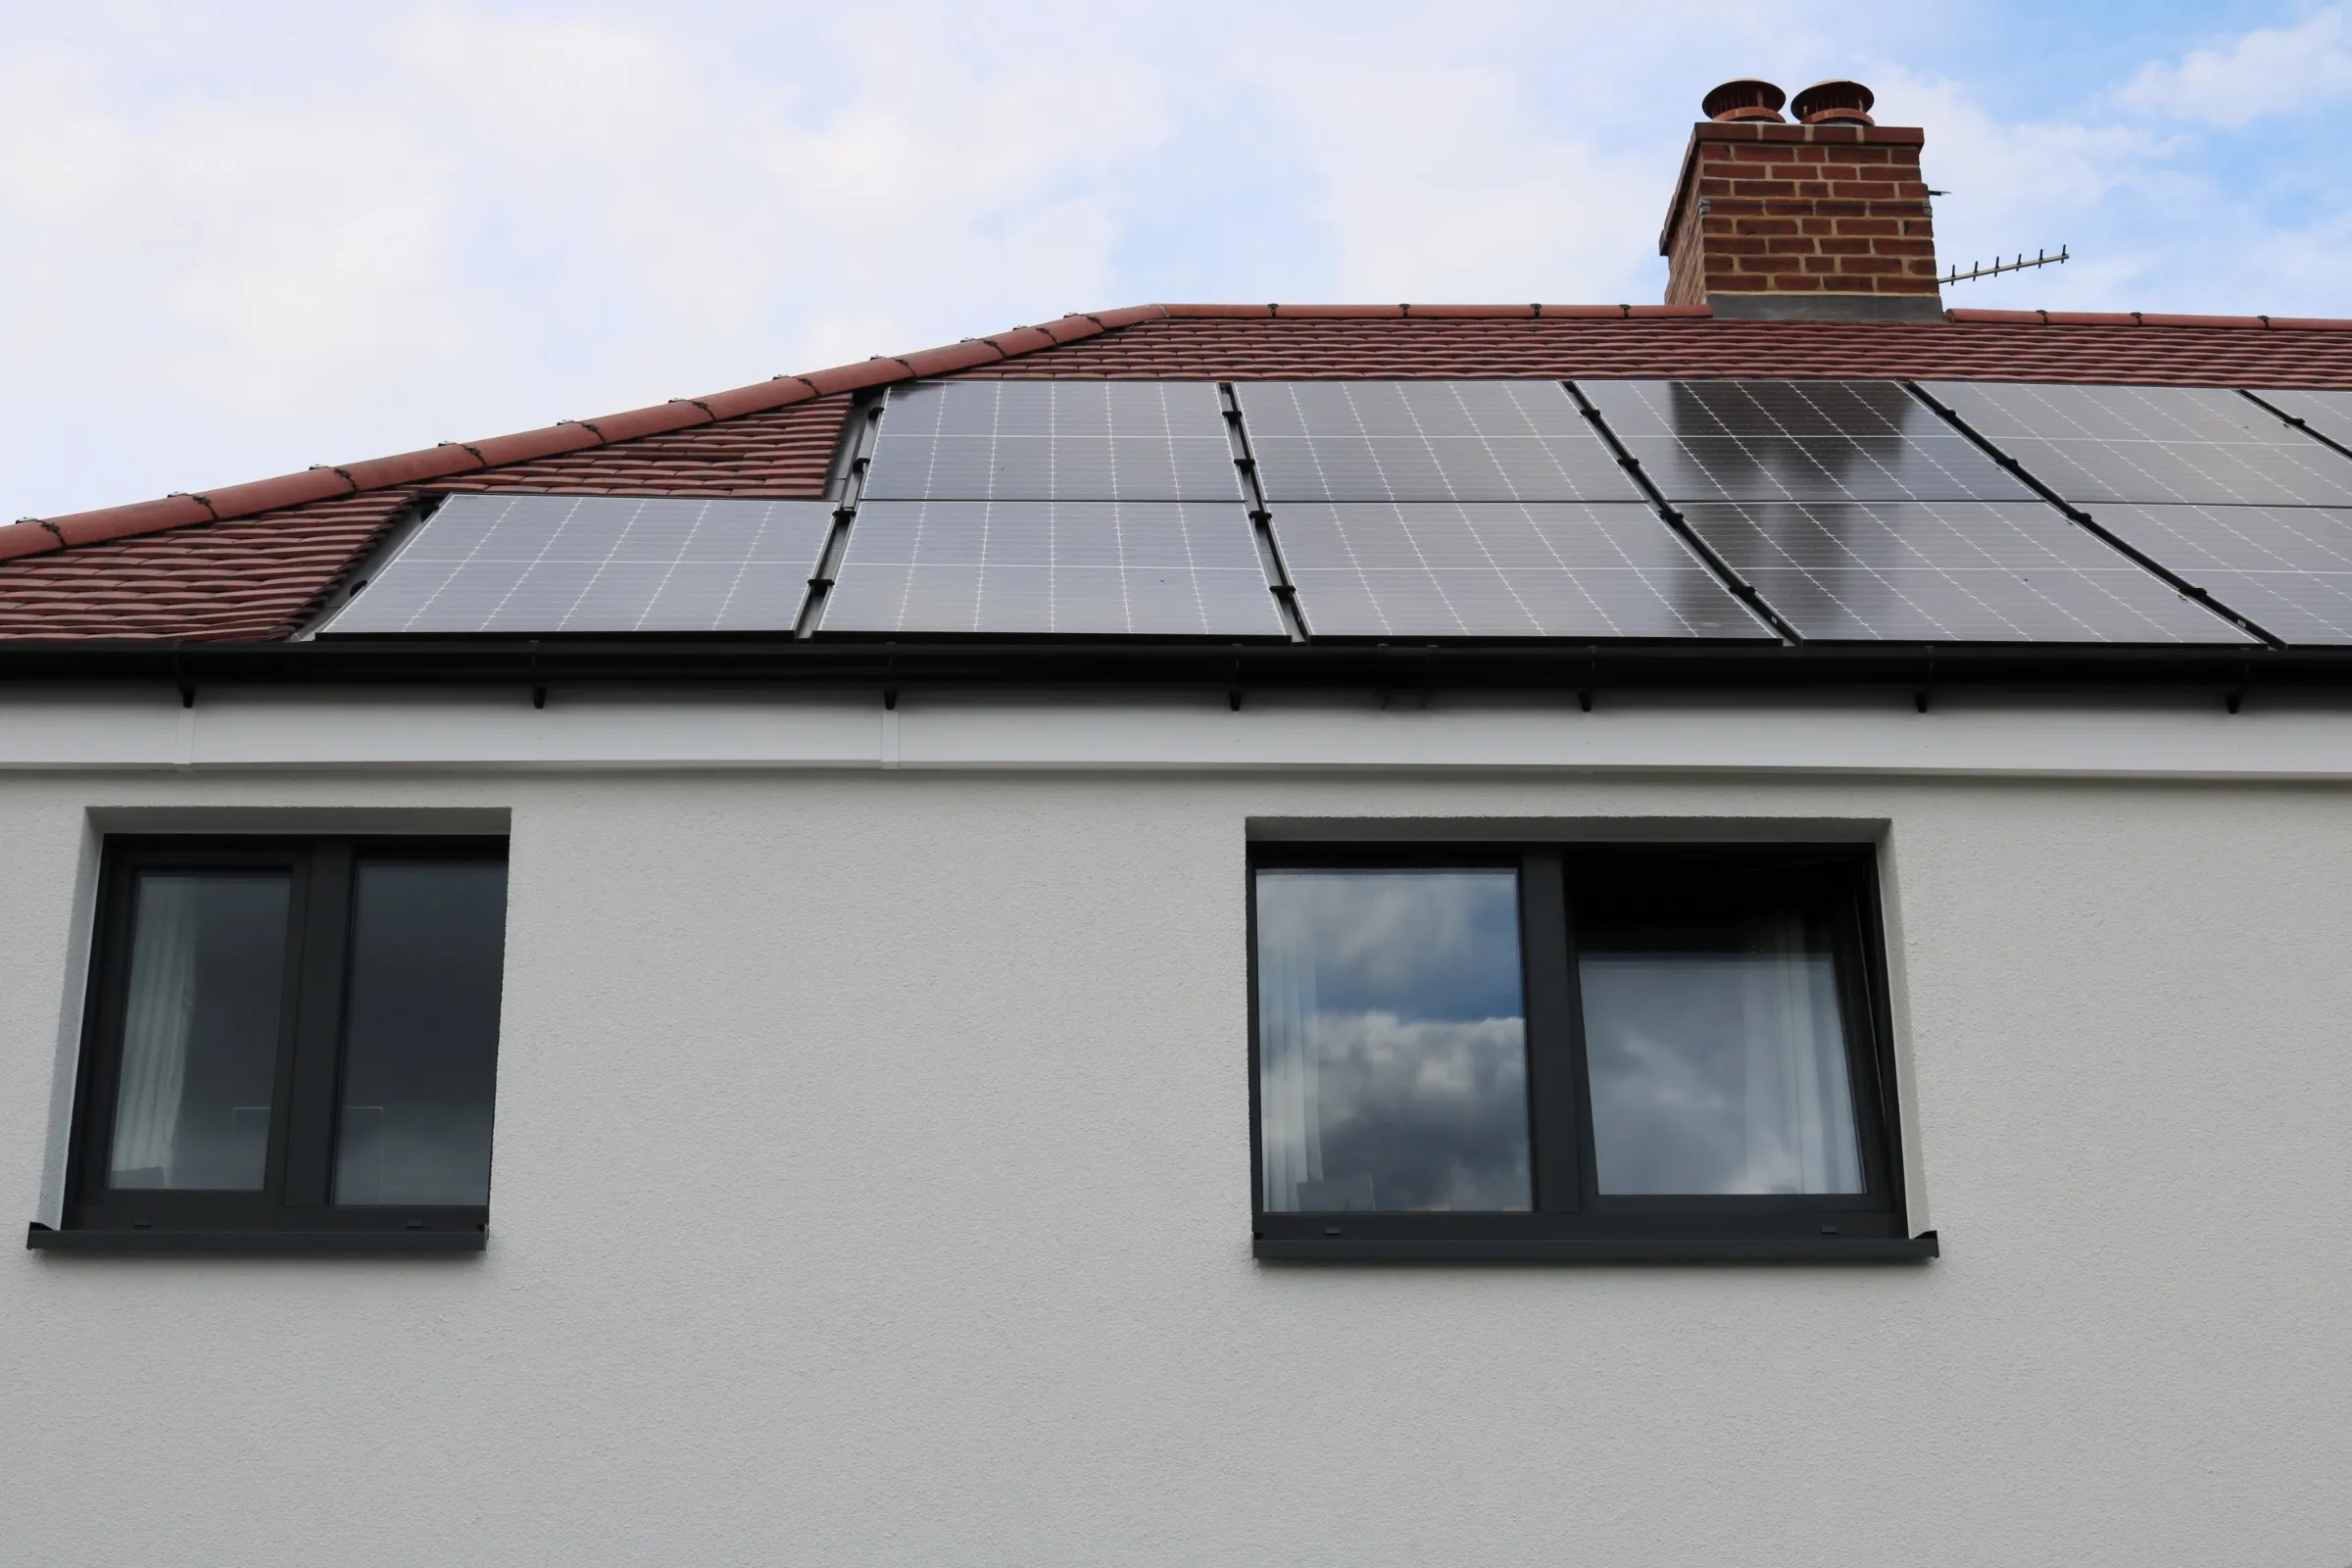 Solar panels cover the roof of a residential home